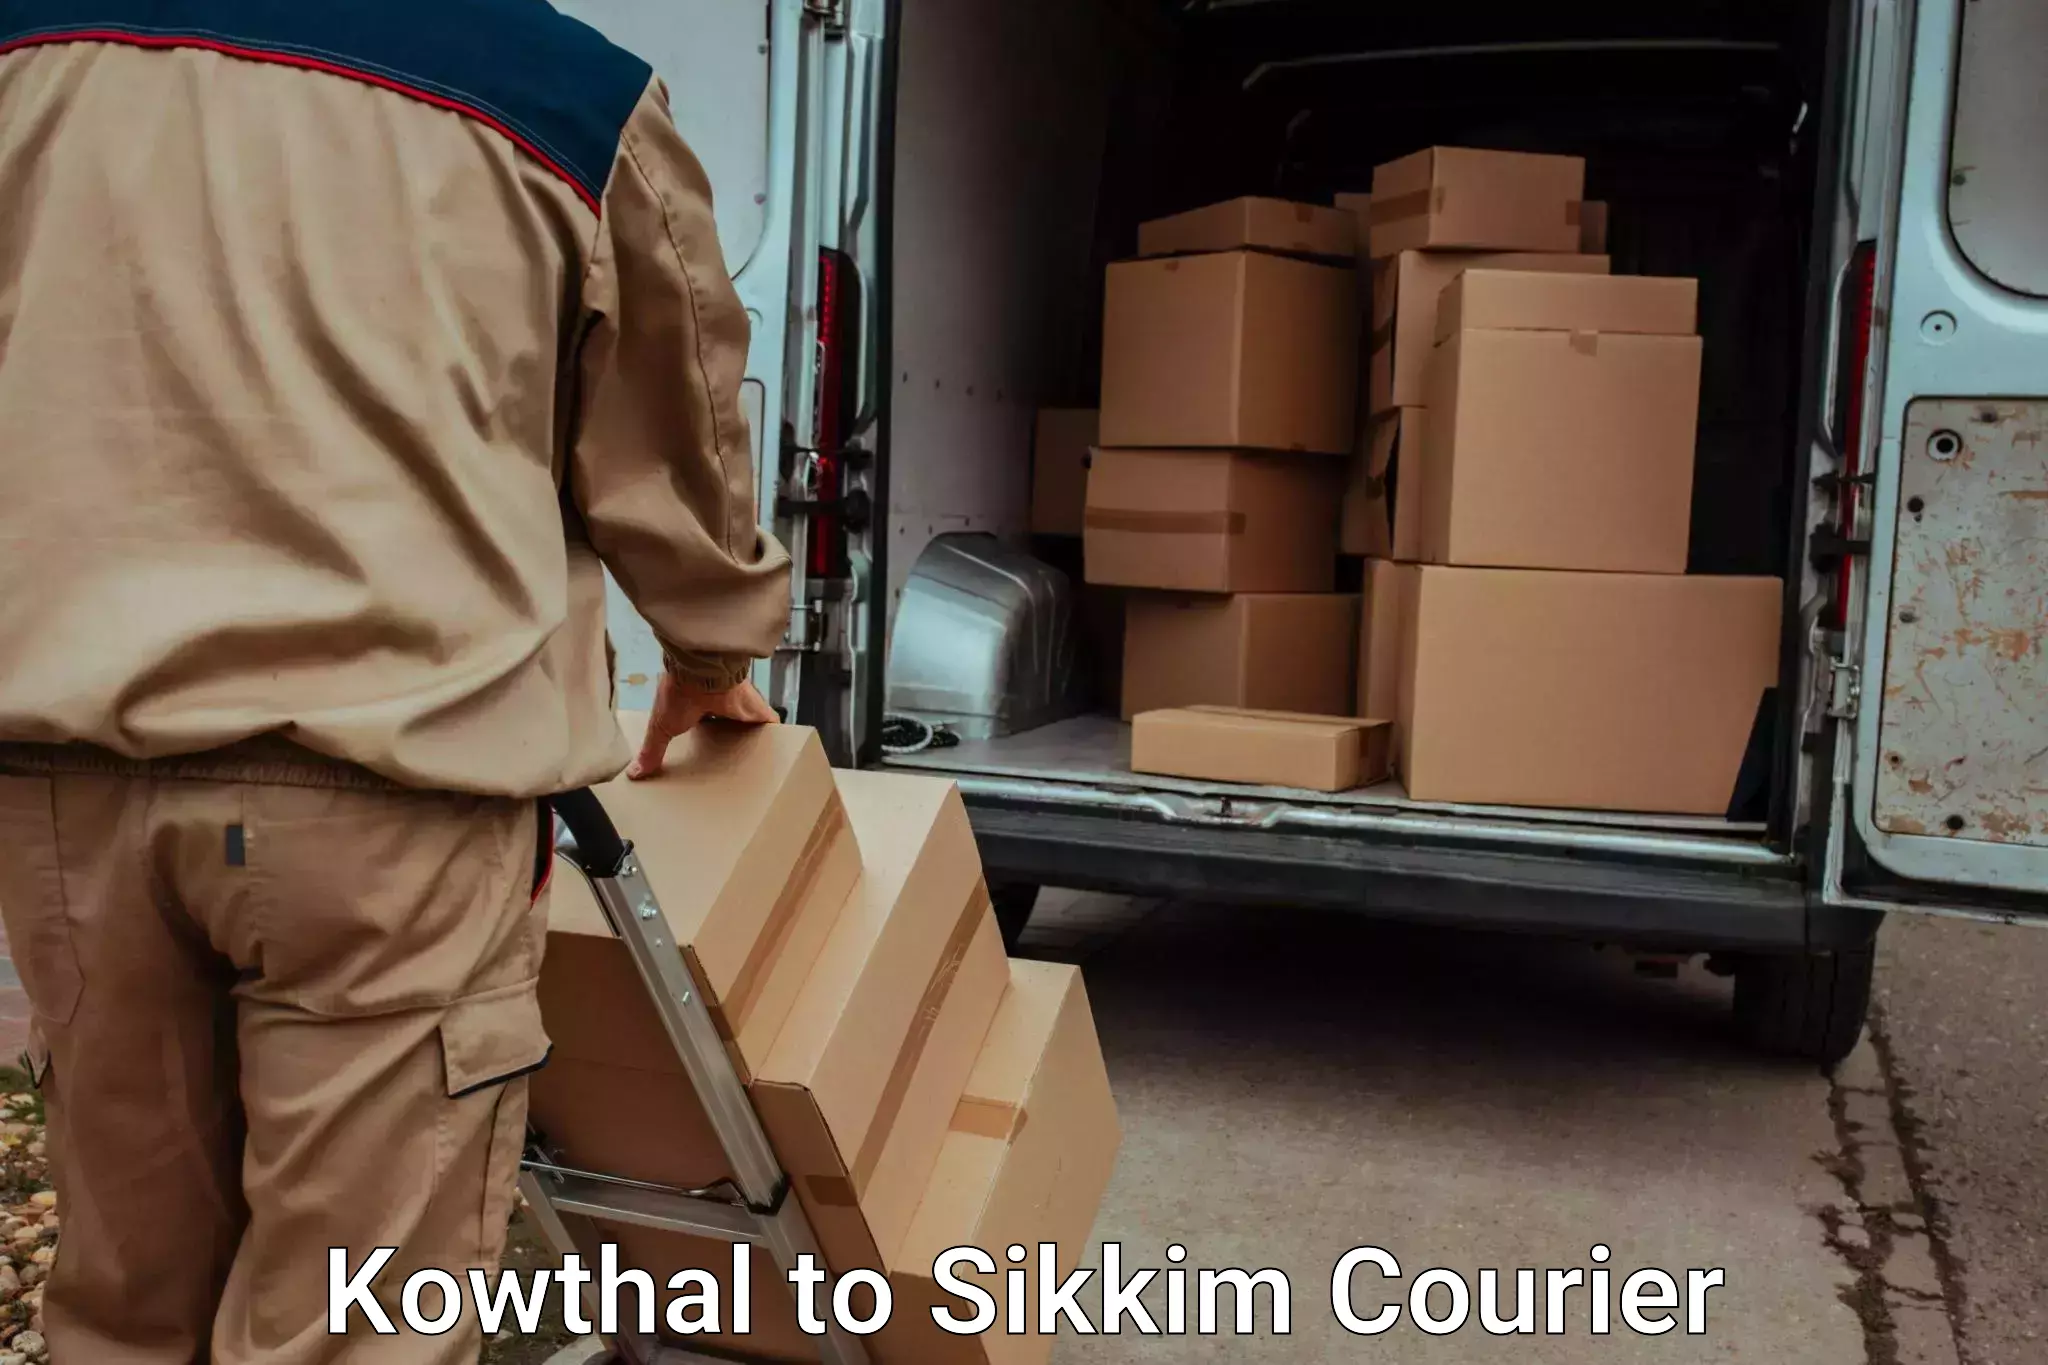 Trusted relocation experts Kowthal to East Sikkim